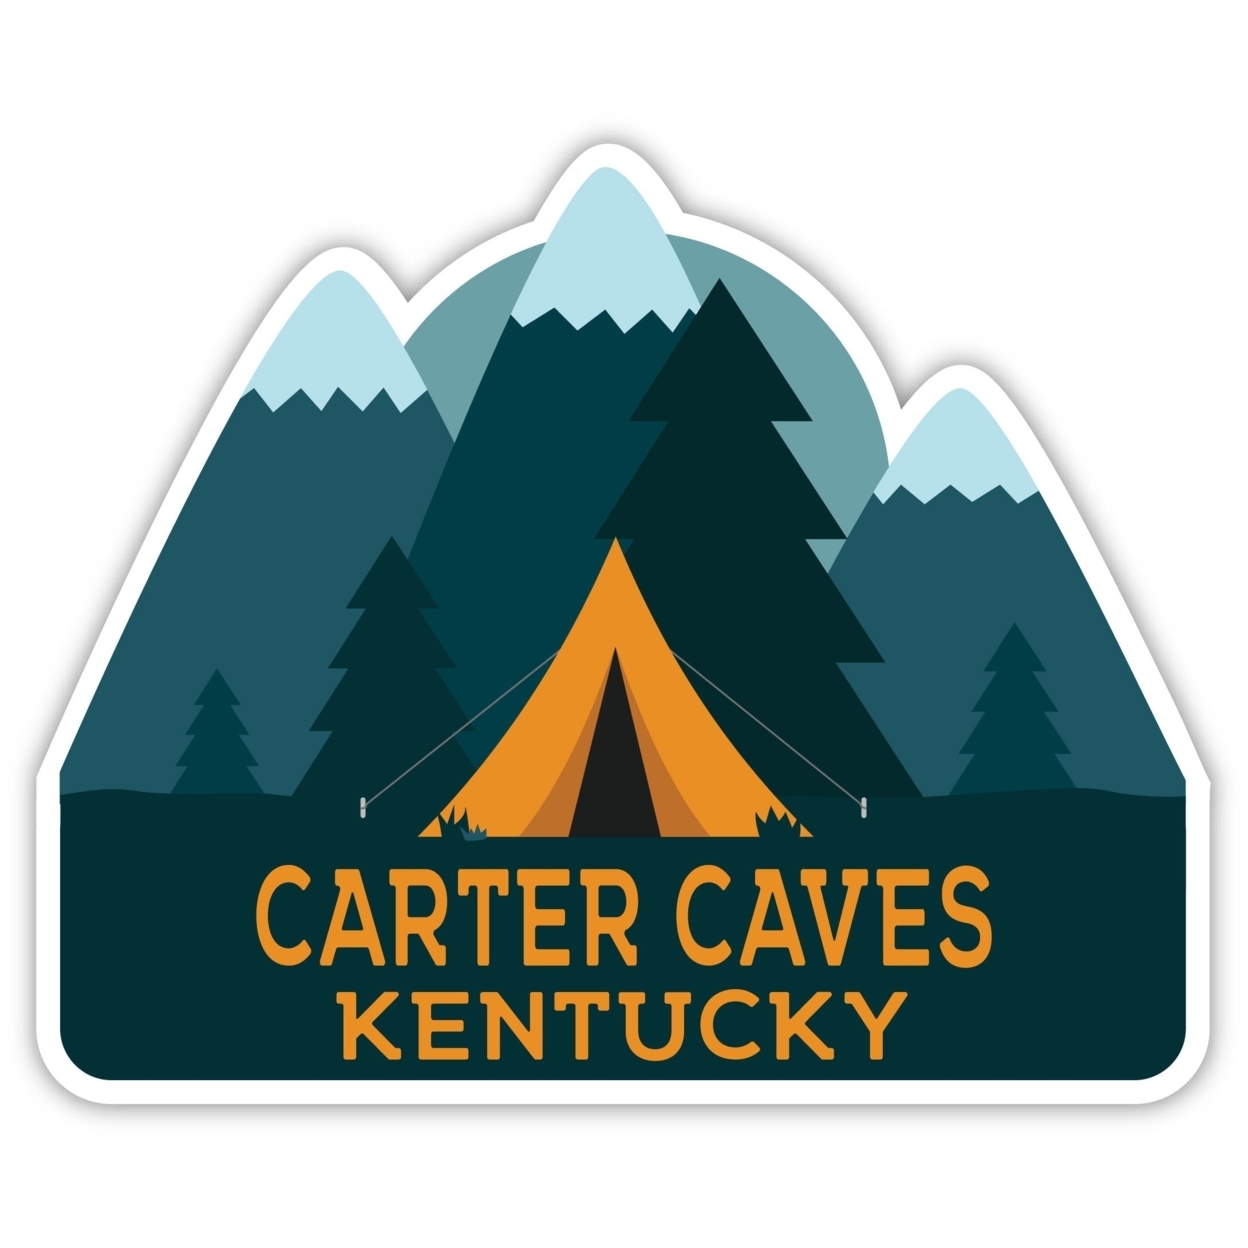 Carter Caves Kentucky Souvenir Decorative Stickers (Choose Theme And Size) - Single Unit, 2-Inch, Tent